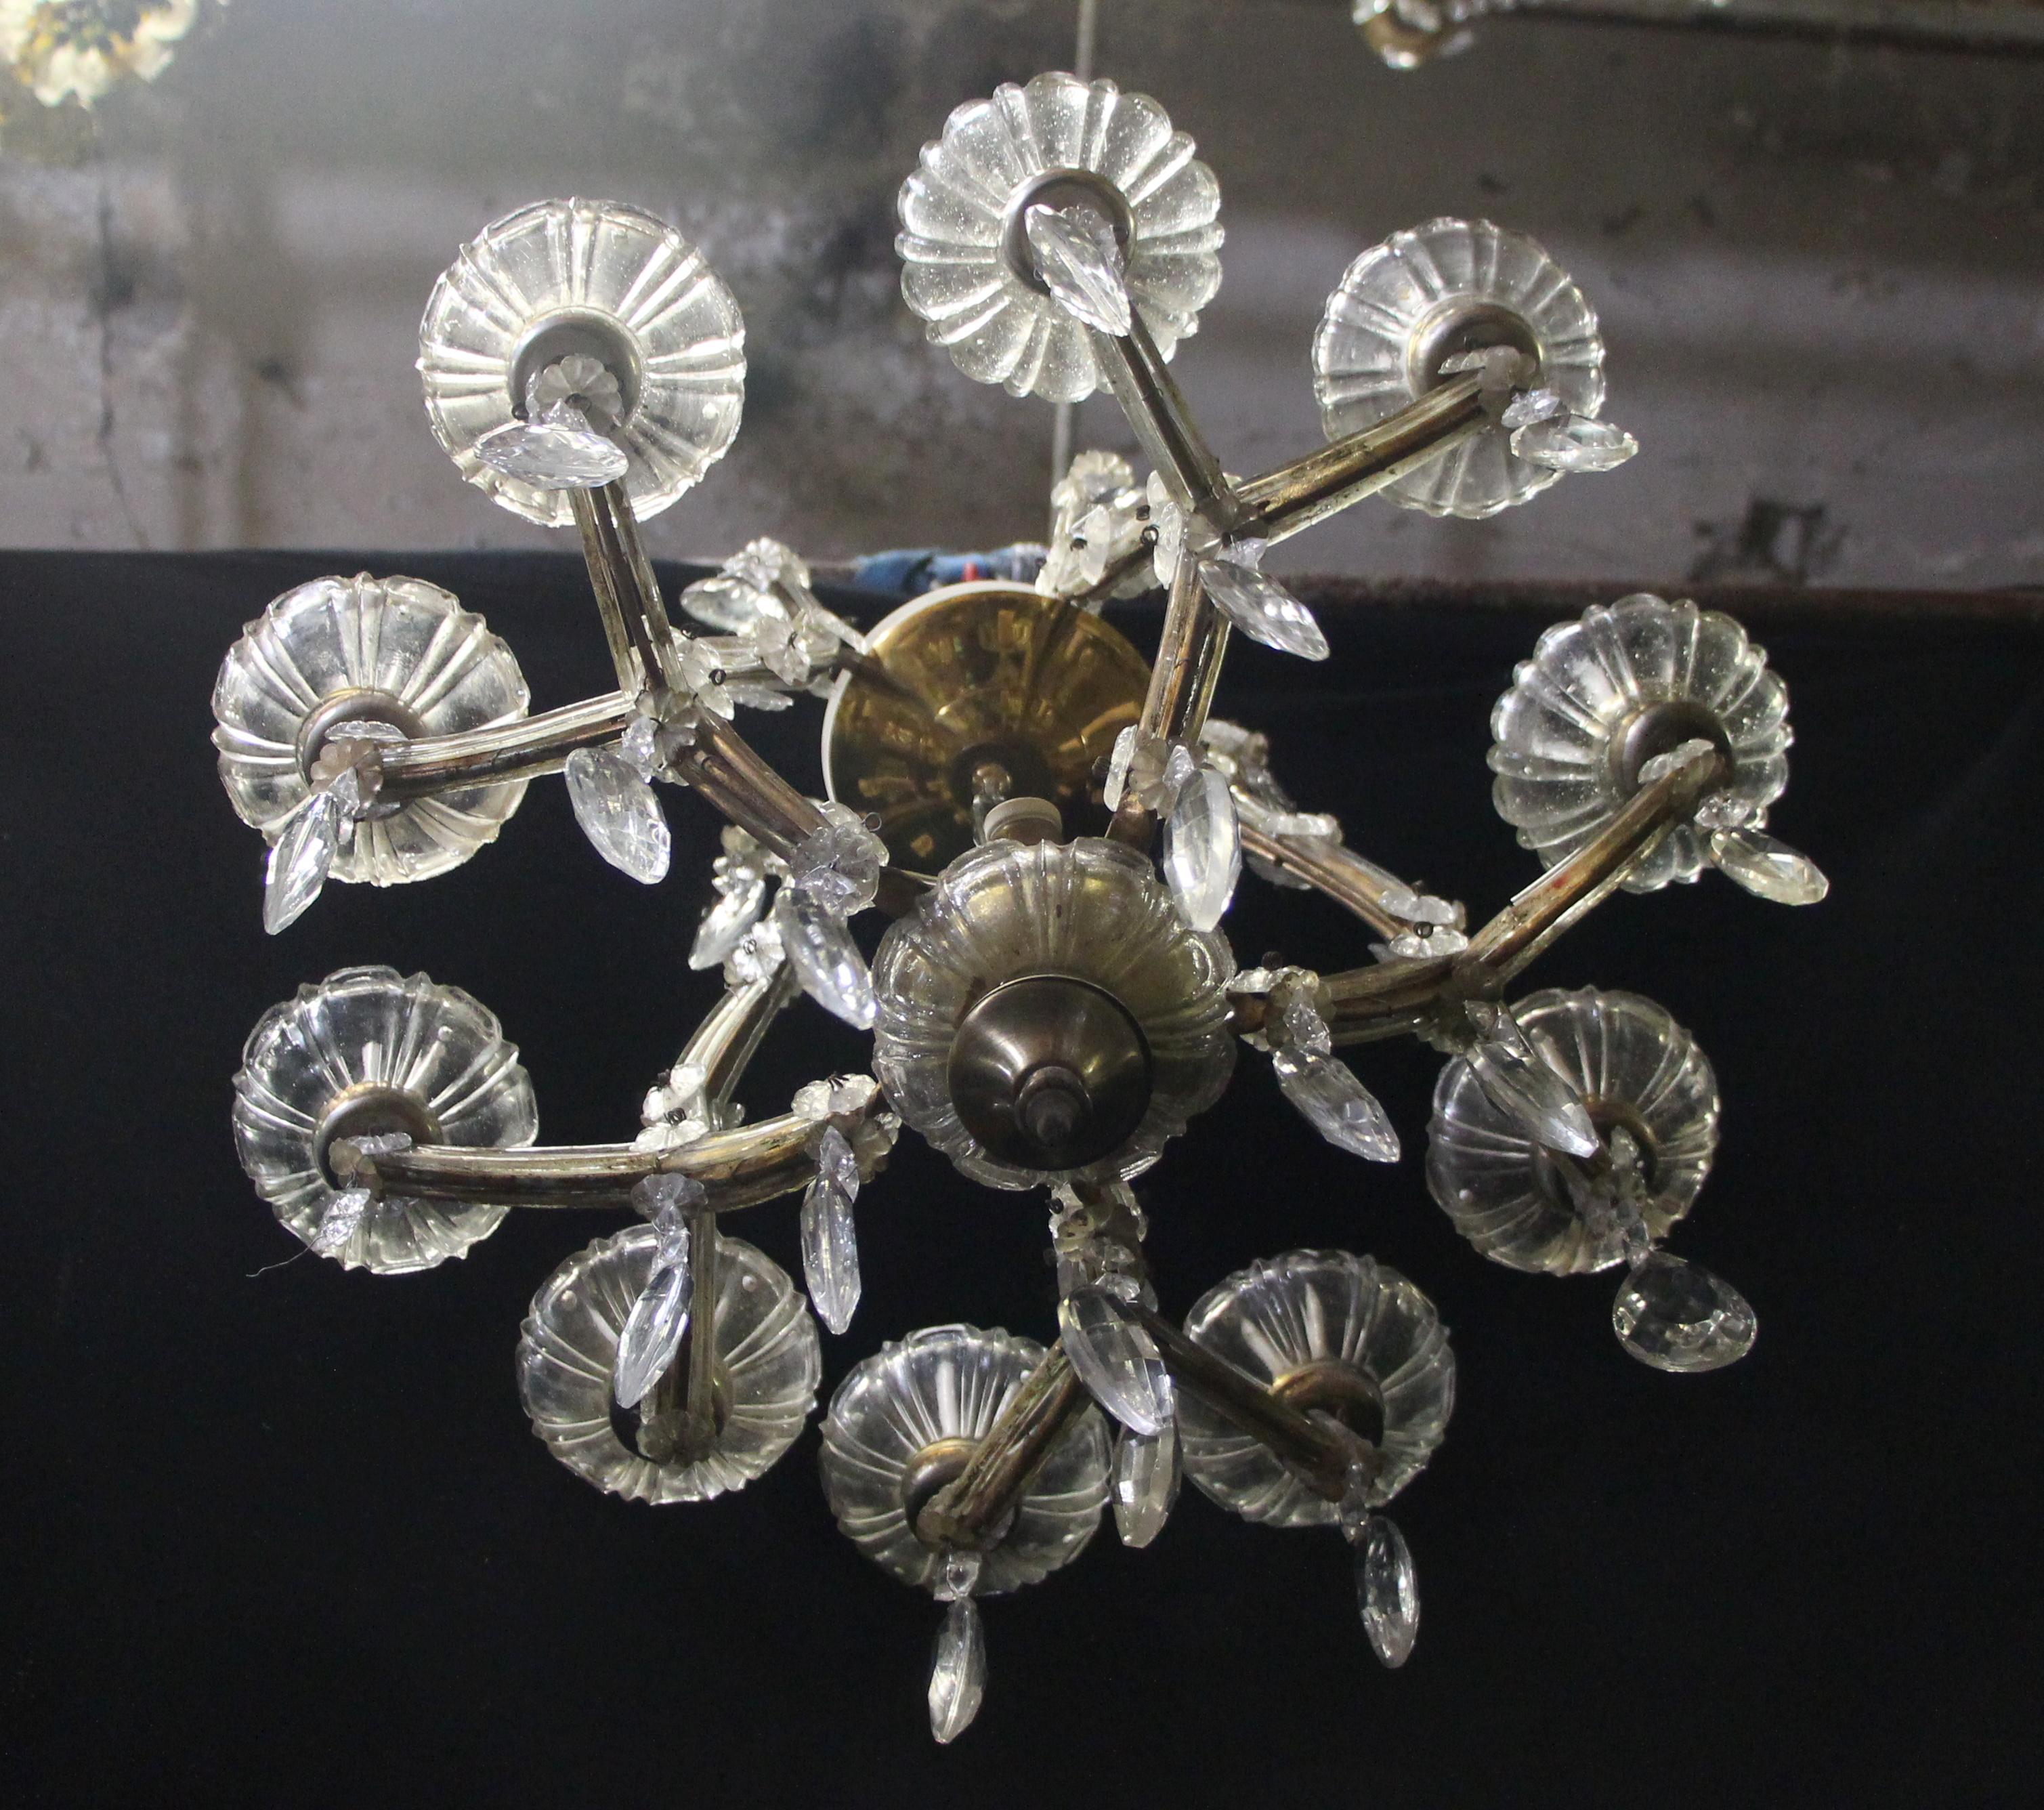 Antique Marie Therese Crystal 10 Arm Chandelier 13 Lights Small Petite 6